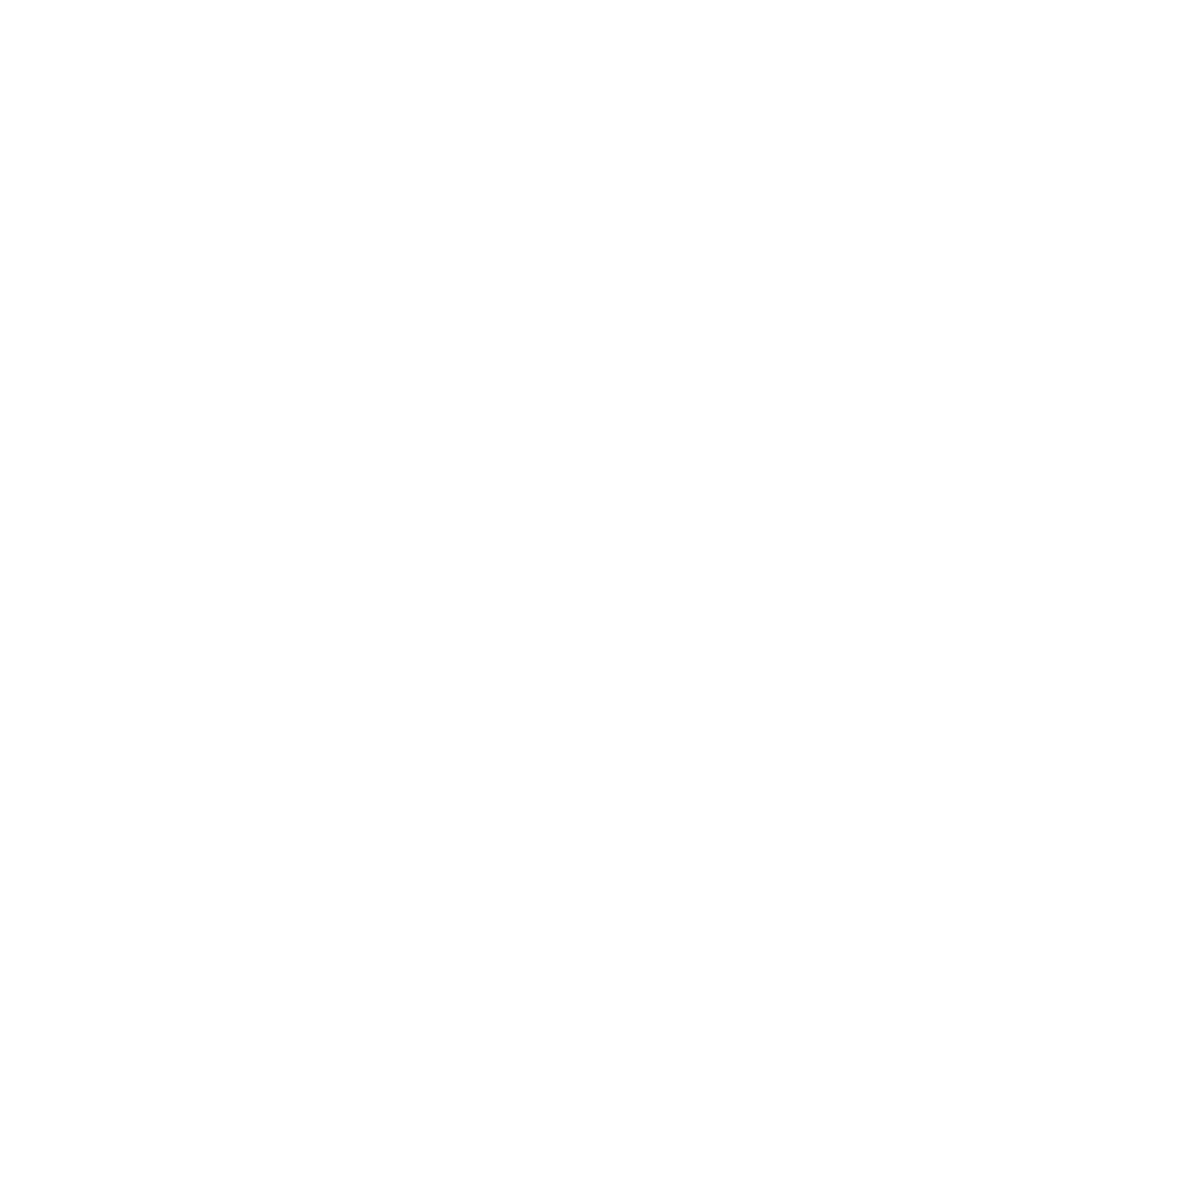 Email designed by iconoci from the Noun Project